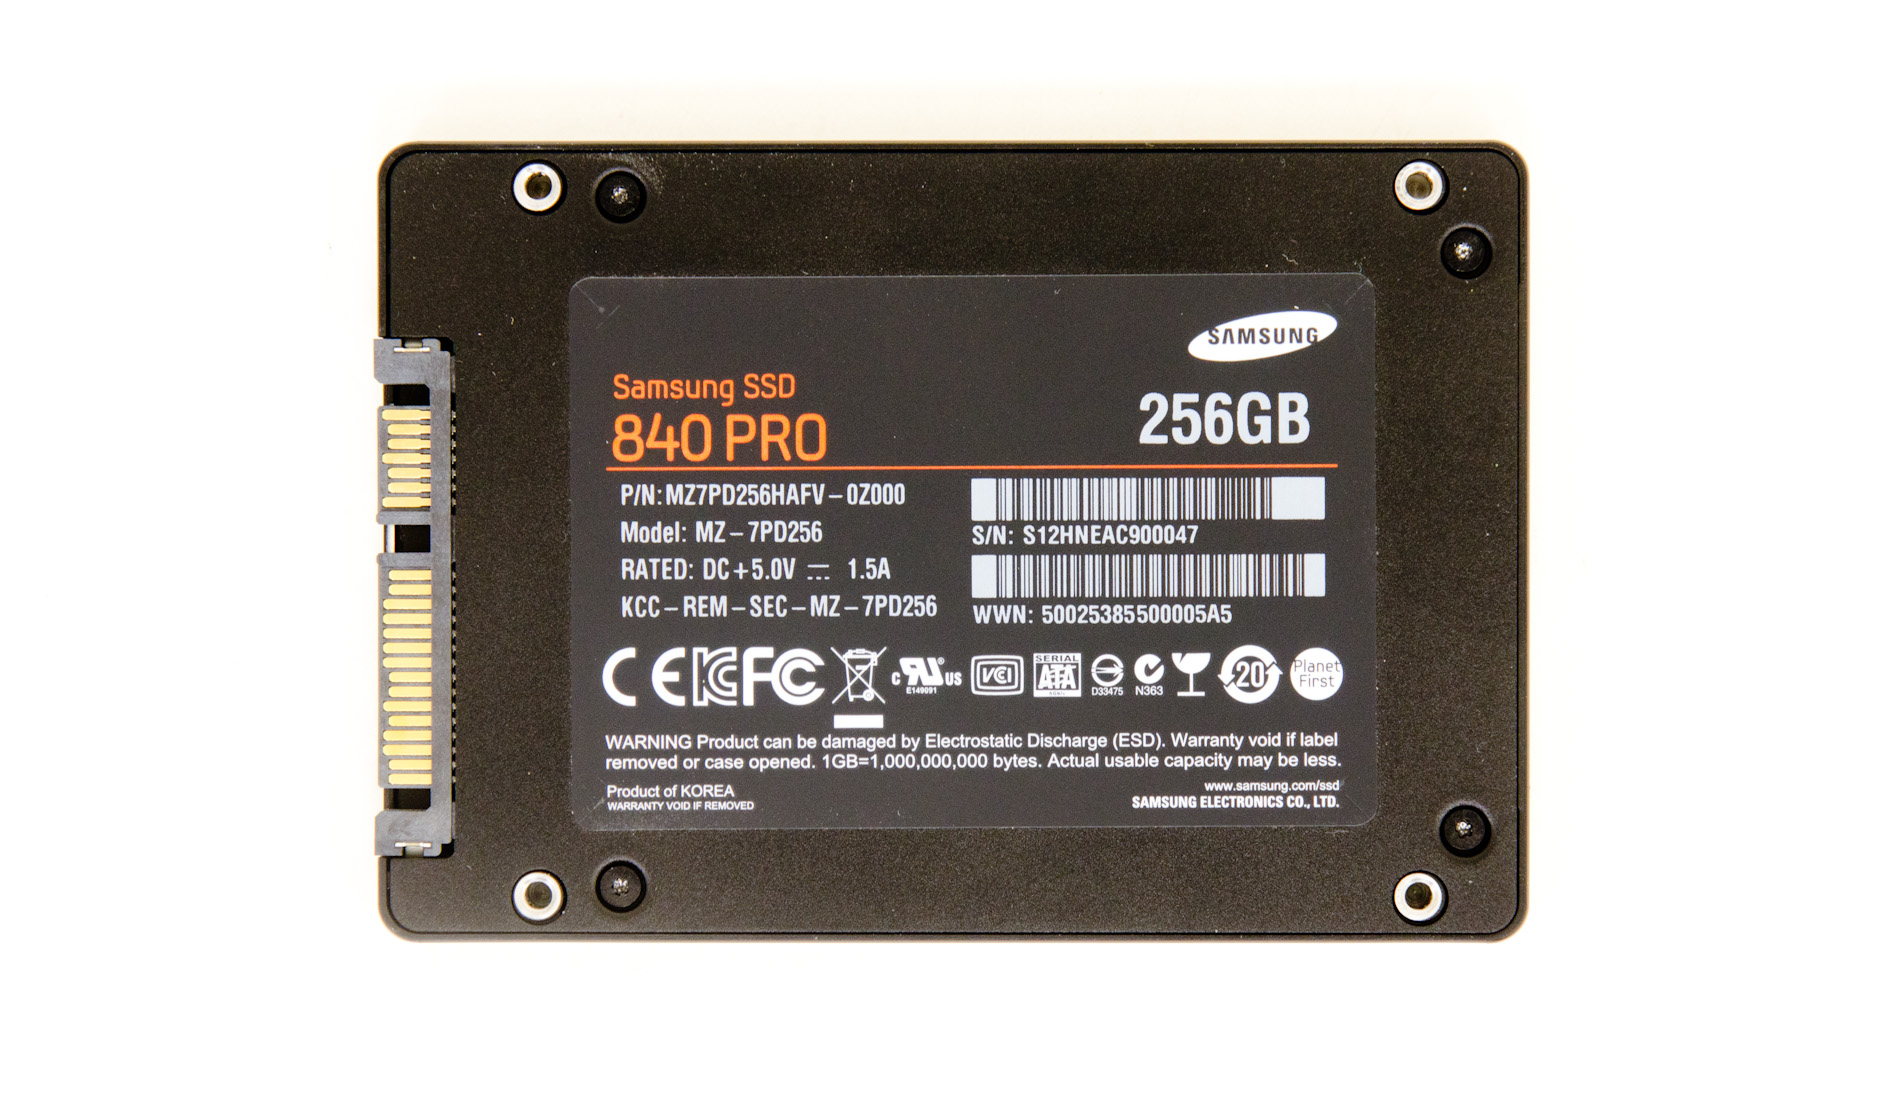 Final Words - SSD (256GB) Review